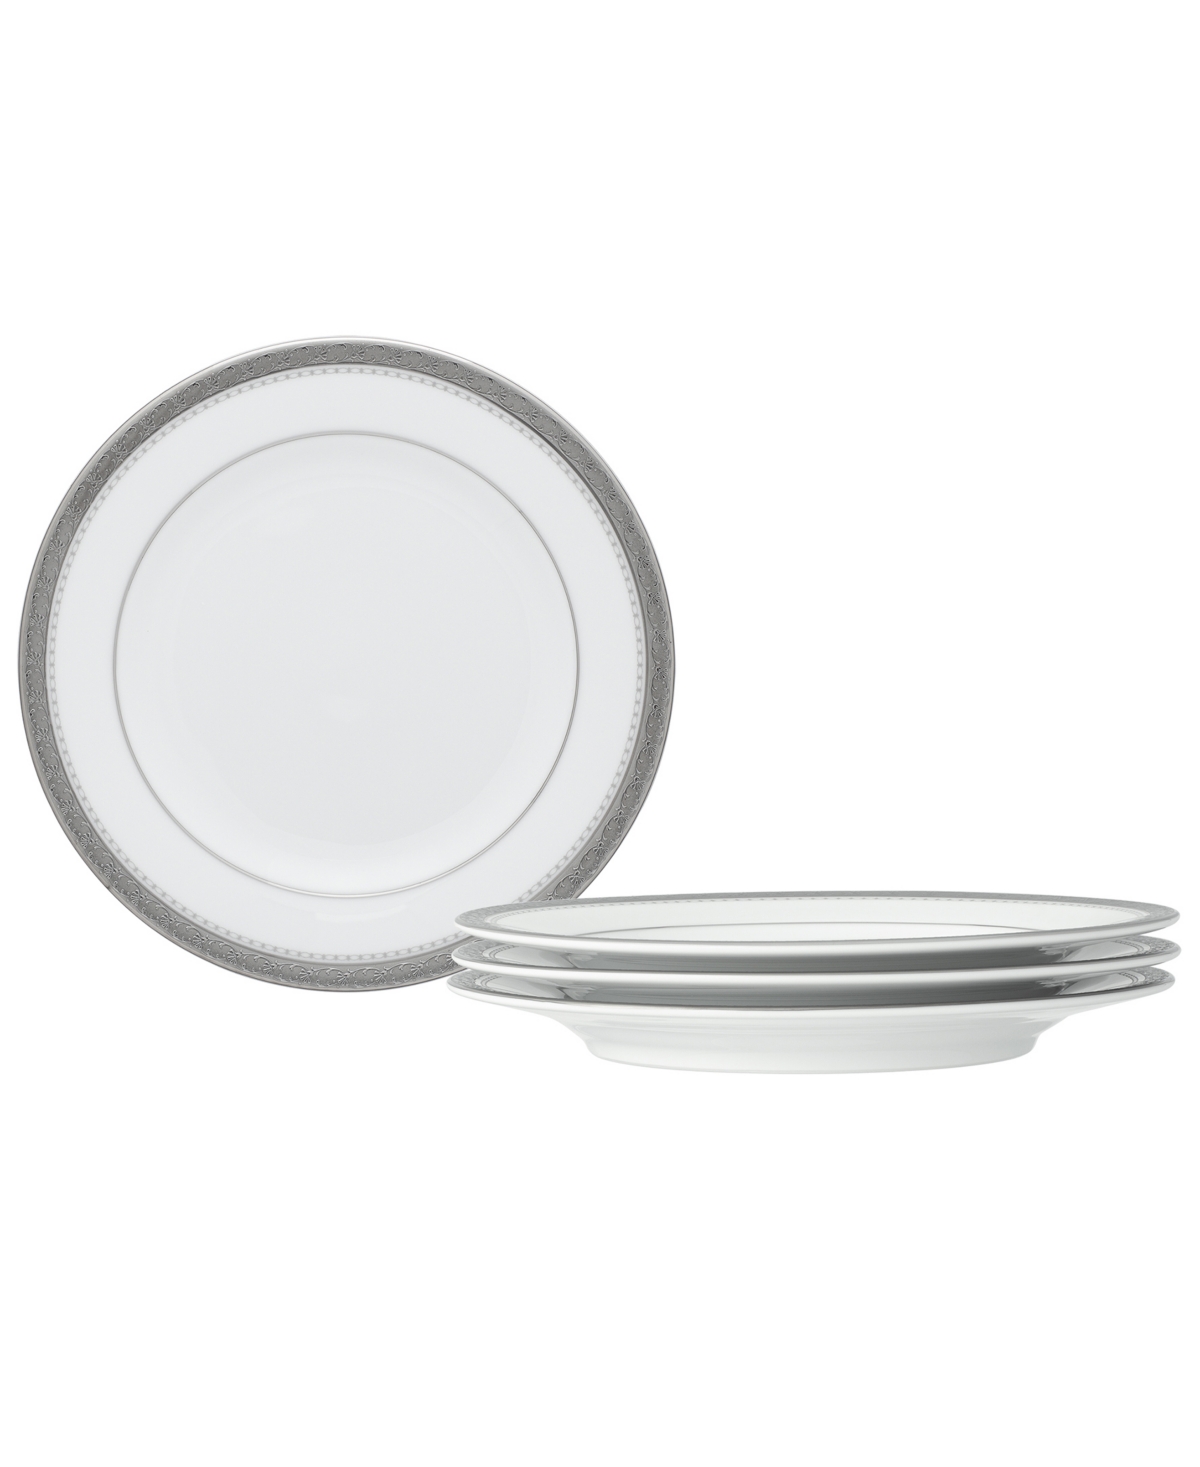 Noritake Charlotta Platinum 4 Piece Bread Butter And Appetizer Plates Set, Service For 4 In White